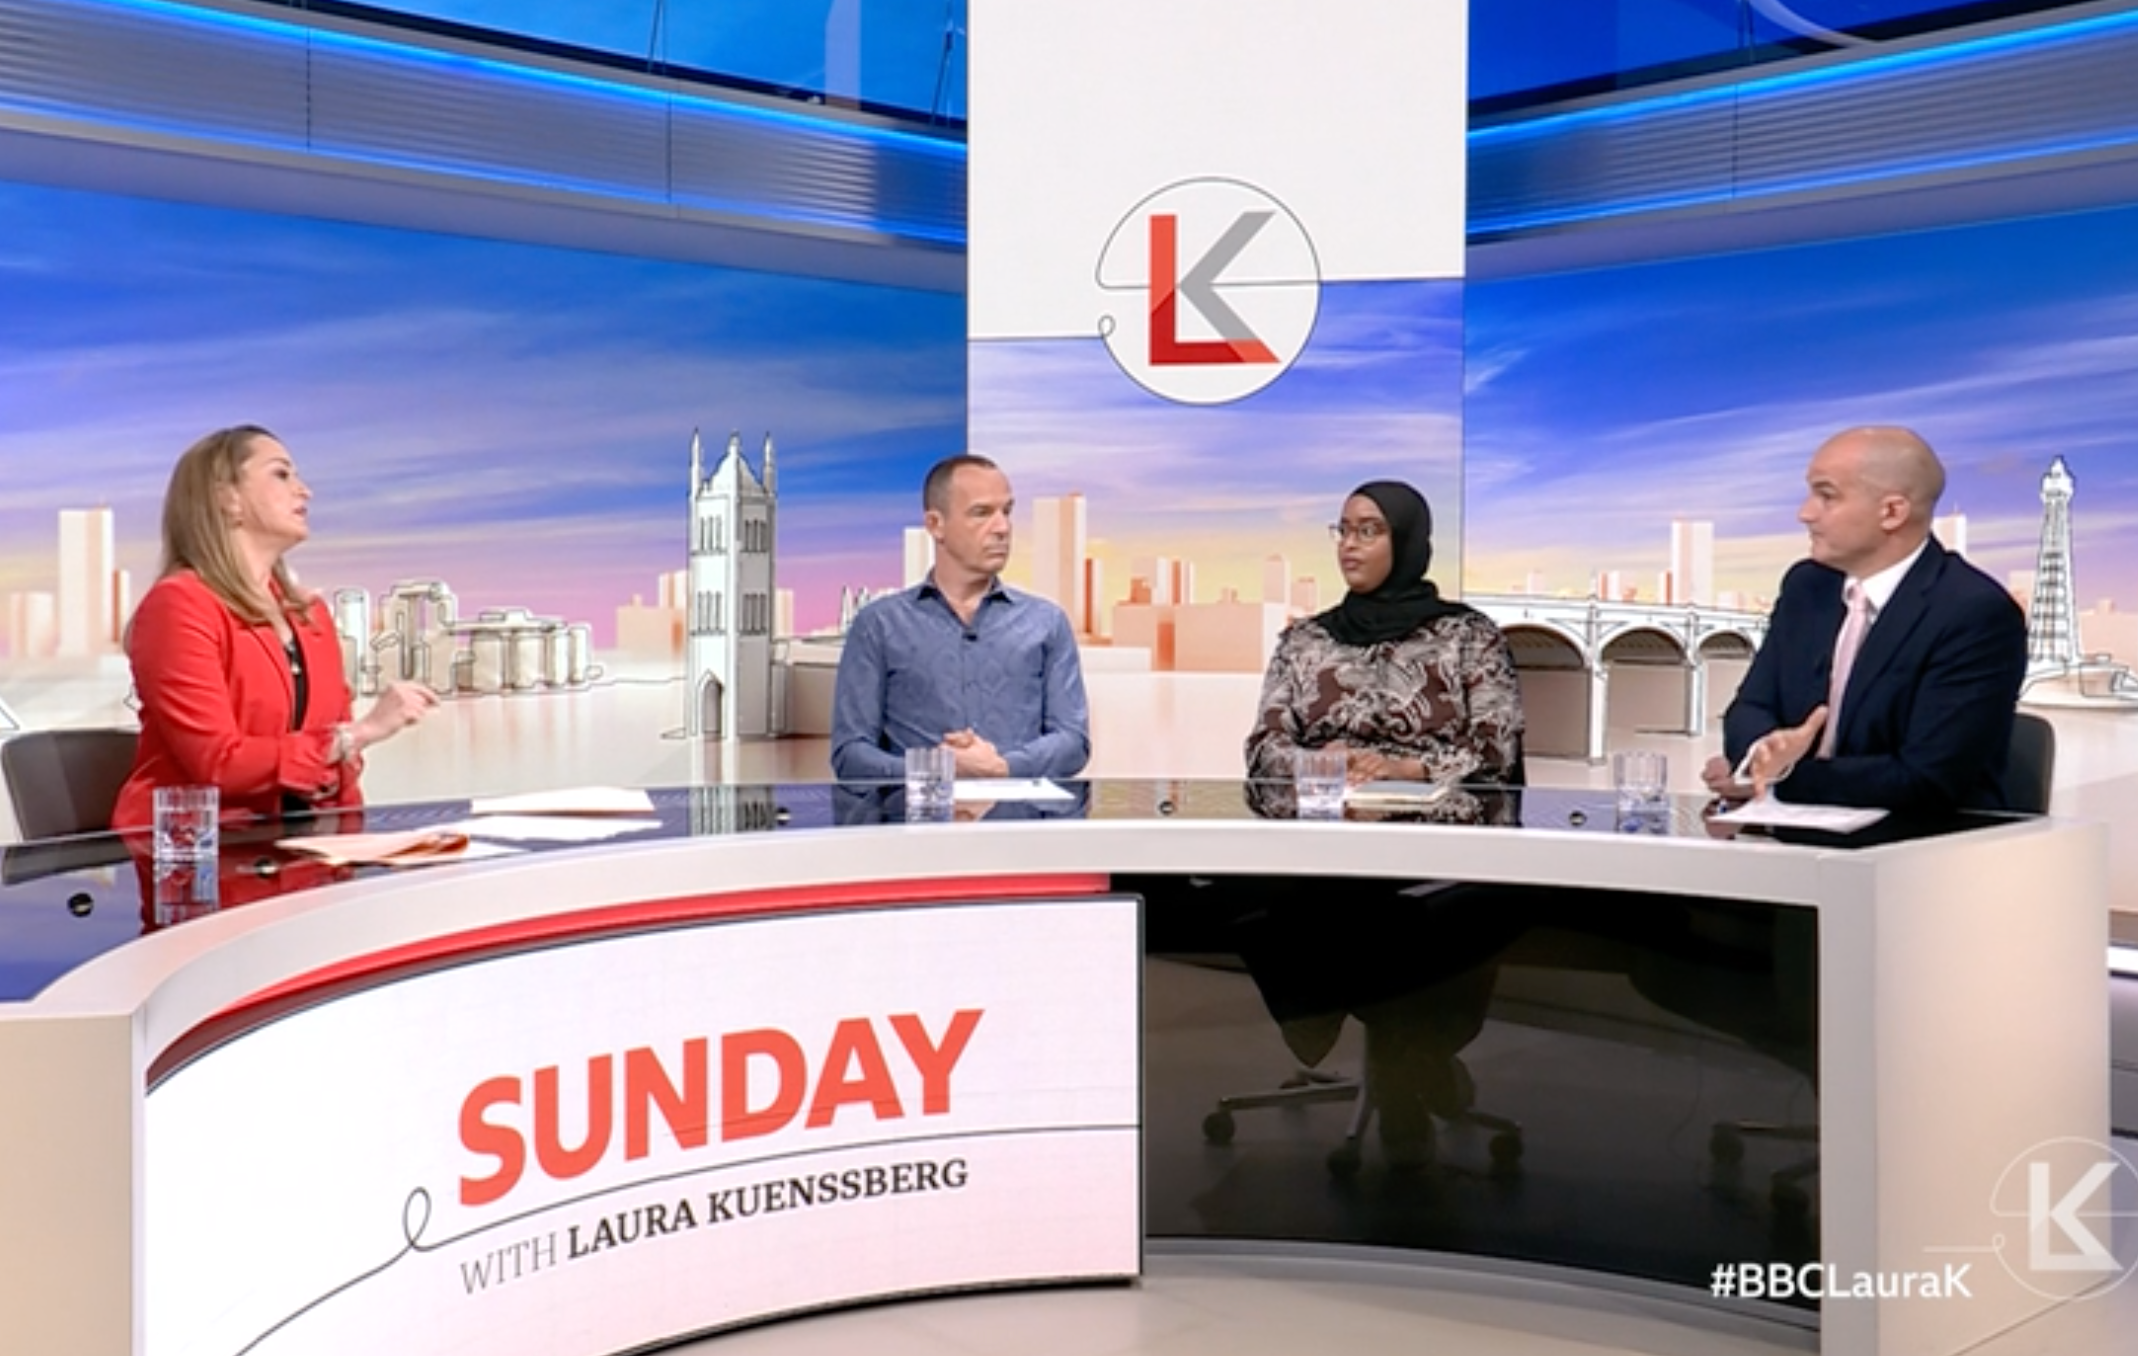 Martin Lewis appeared on the BBC’s Sunday with Laura Kuenssberg show